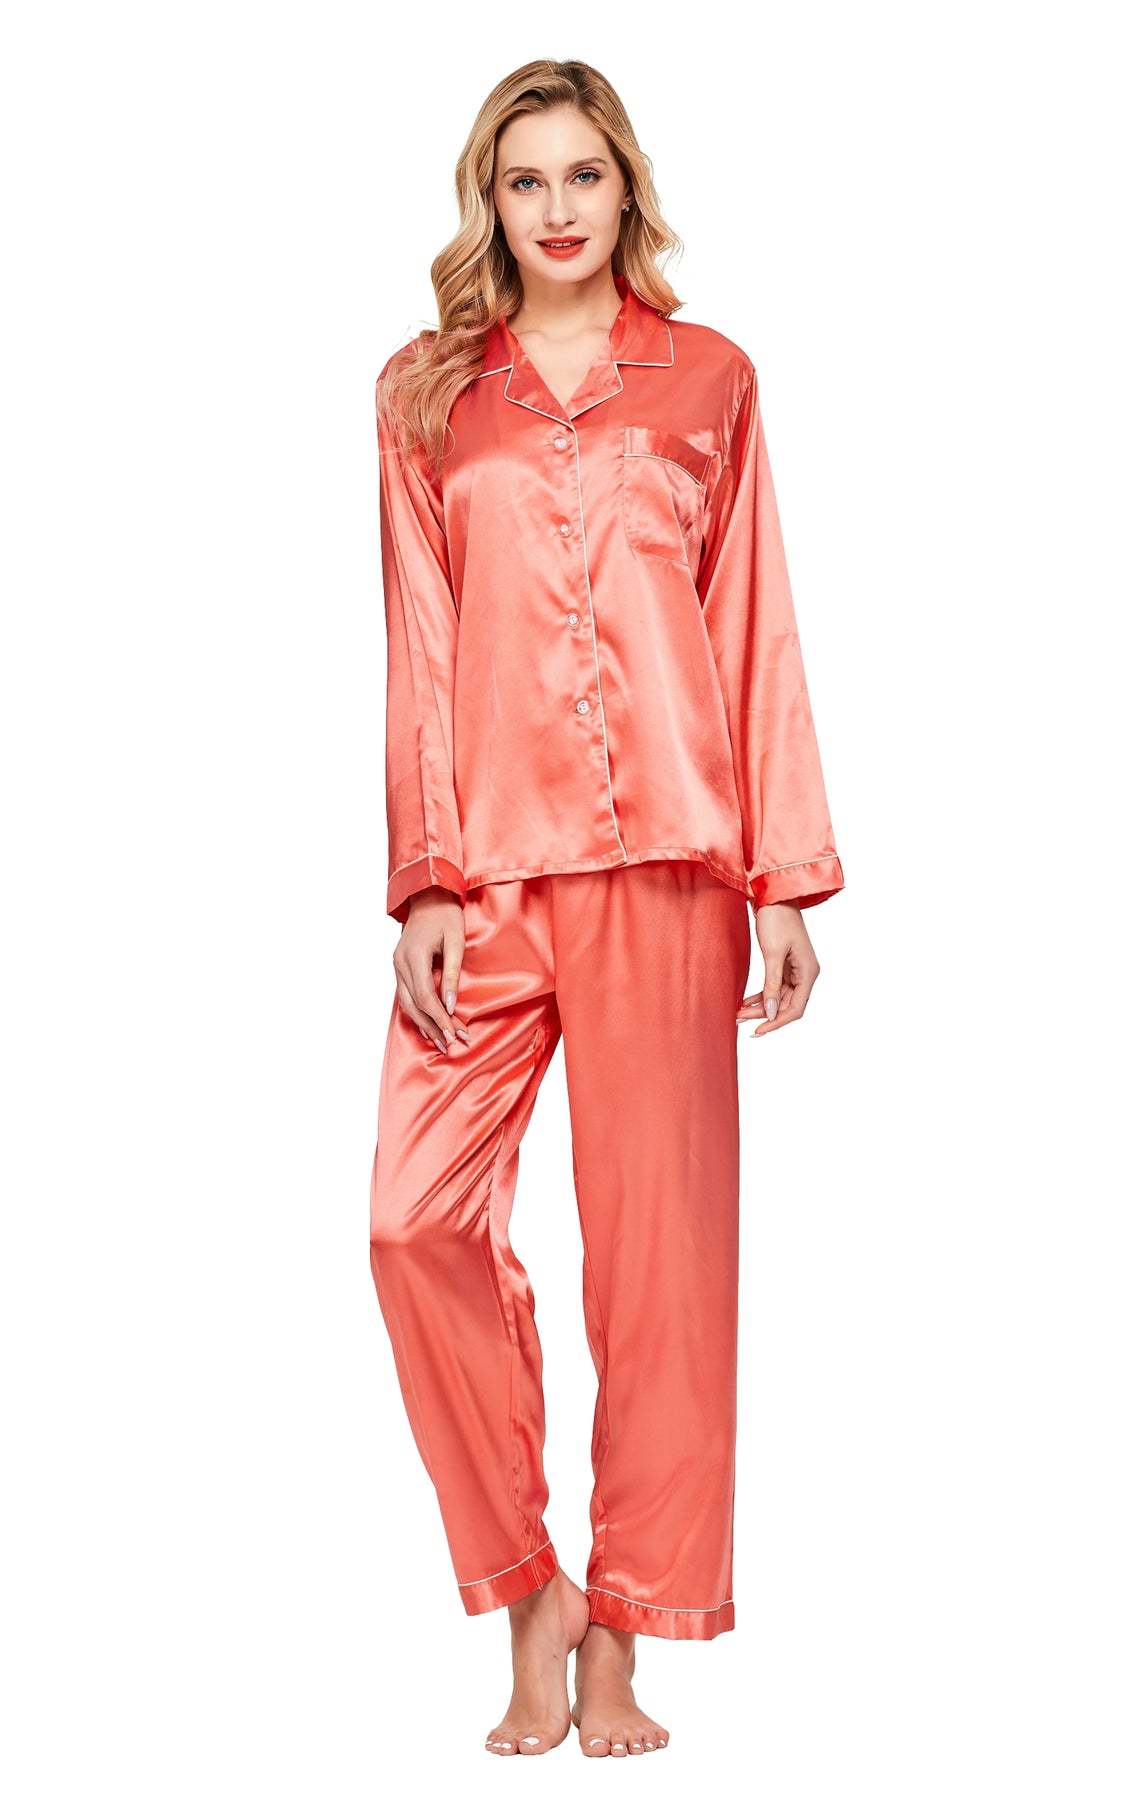 Womens Silk Satin Pajama Set Long Sleeve Living Coral With White Pipi Tony And Candice 